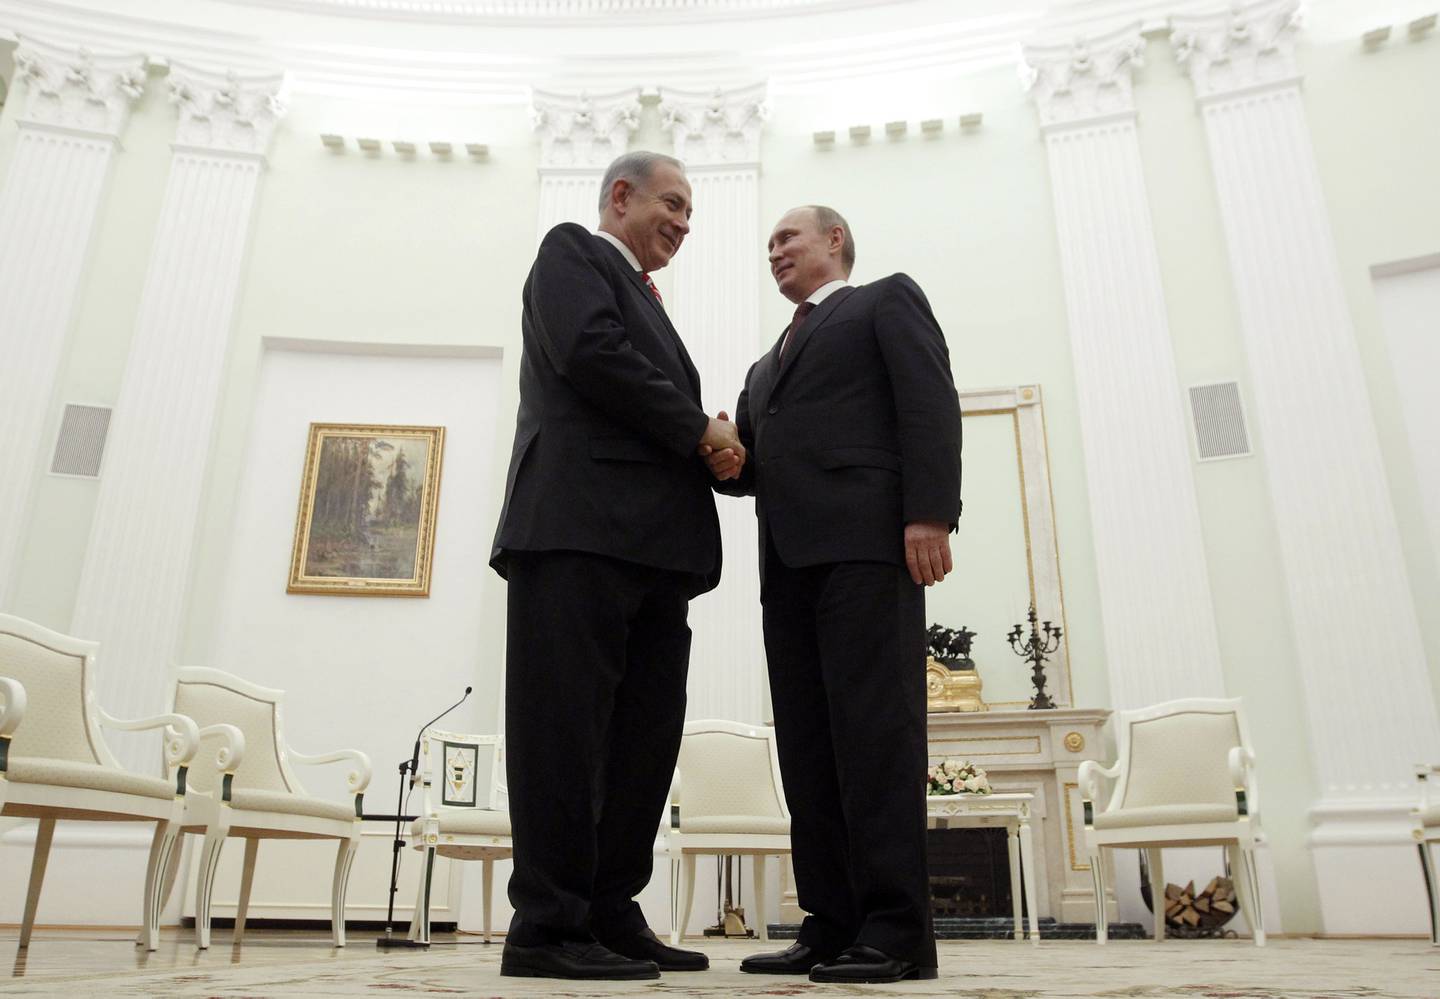 Russian President Vladimir Putin, right, shakes hands with Israeli Prime Minister Benjamin Netanyahu during their meeting in the Kremlin in Moscow, Russia, Wednesday, Nov. 20, 2013. Their talks are expected to focus on the Iranian nuclear program. Wednesday's talks in the Kremlin come as Iran and six world powers, including Russia, sat down for a new round of negotiations. Putin and Netanyahu didn't mention the Iranian issue in brief remarks at the meetings start before continuing the talks in private. (AP Photo/Maxim Shemetov)